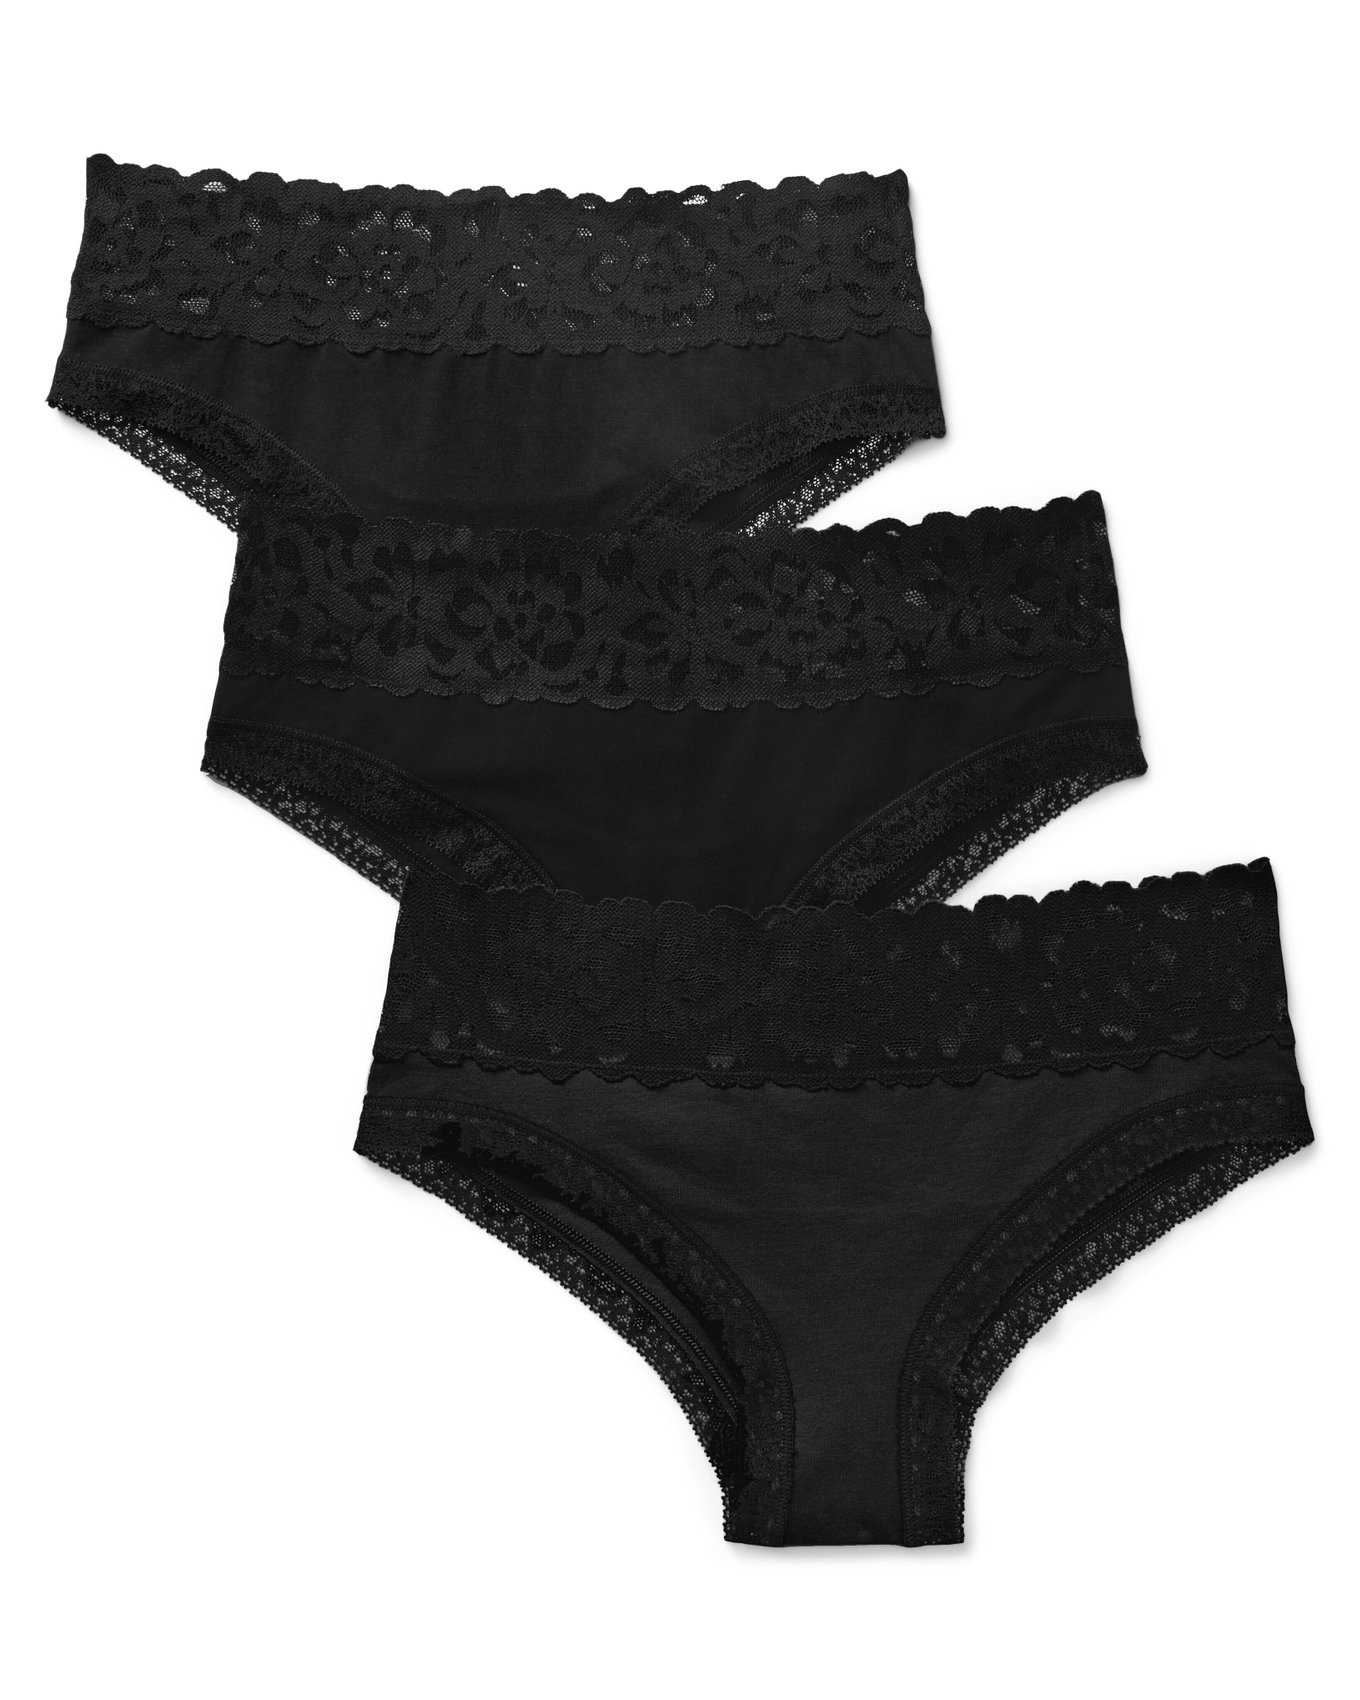 SKINY Skiny every day in cotton lace panty 2 pack